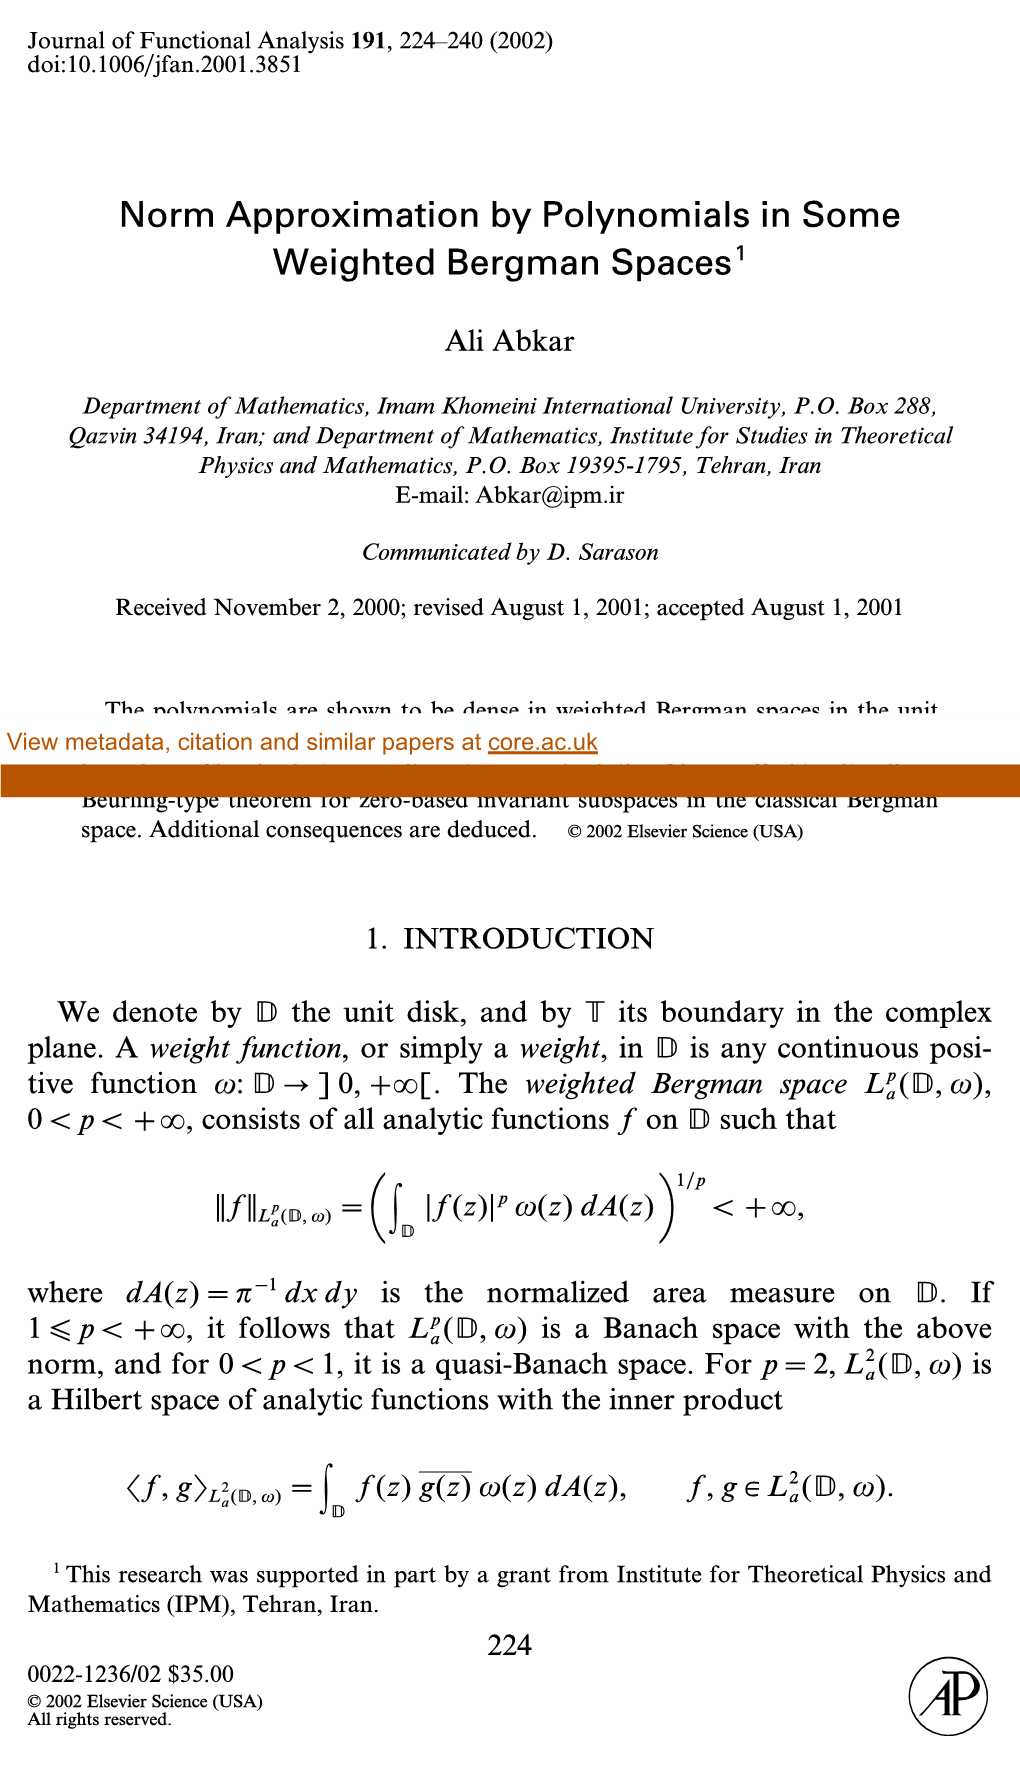 Norm Approximation by Polynomials in Some Weighted Bergman Spaces1